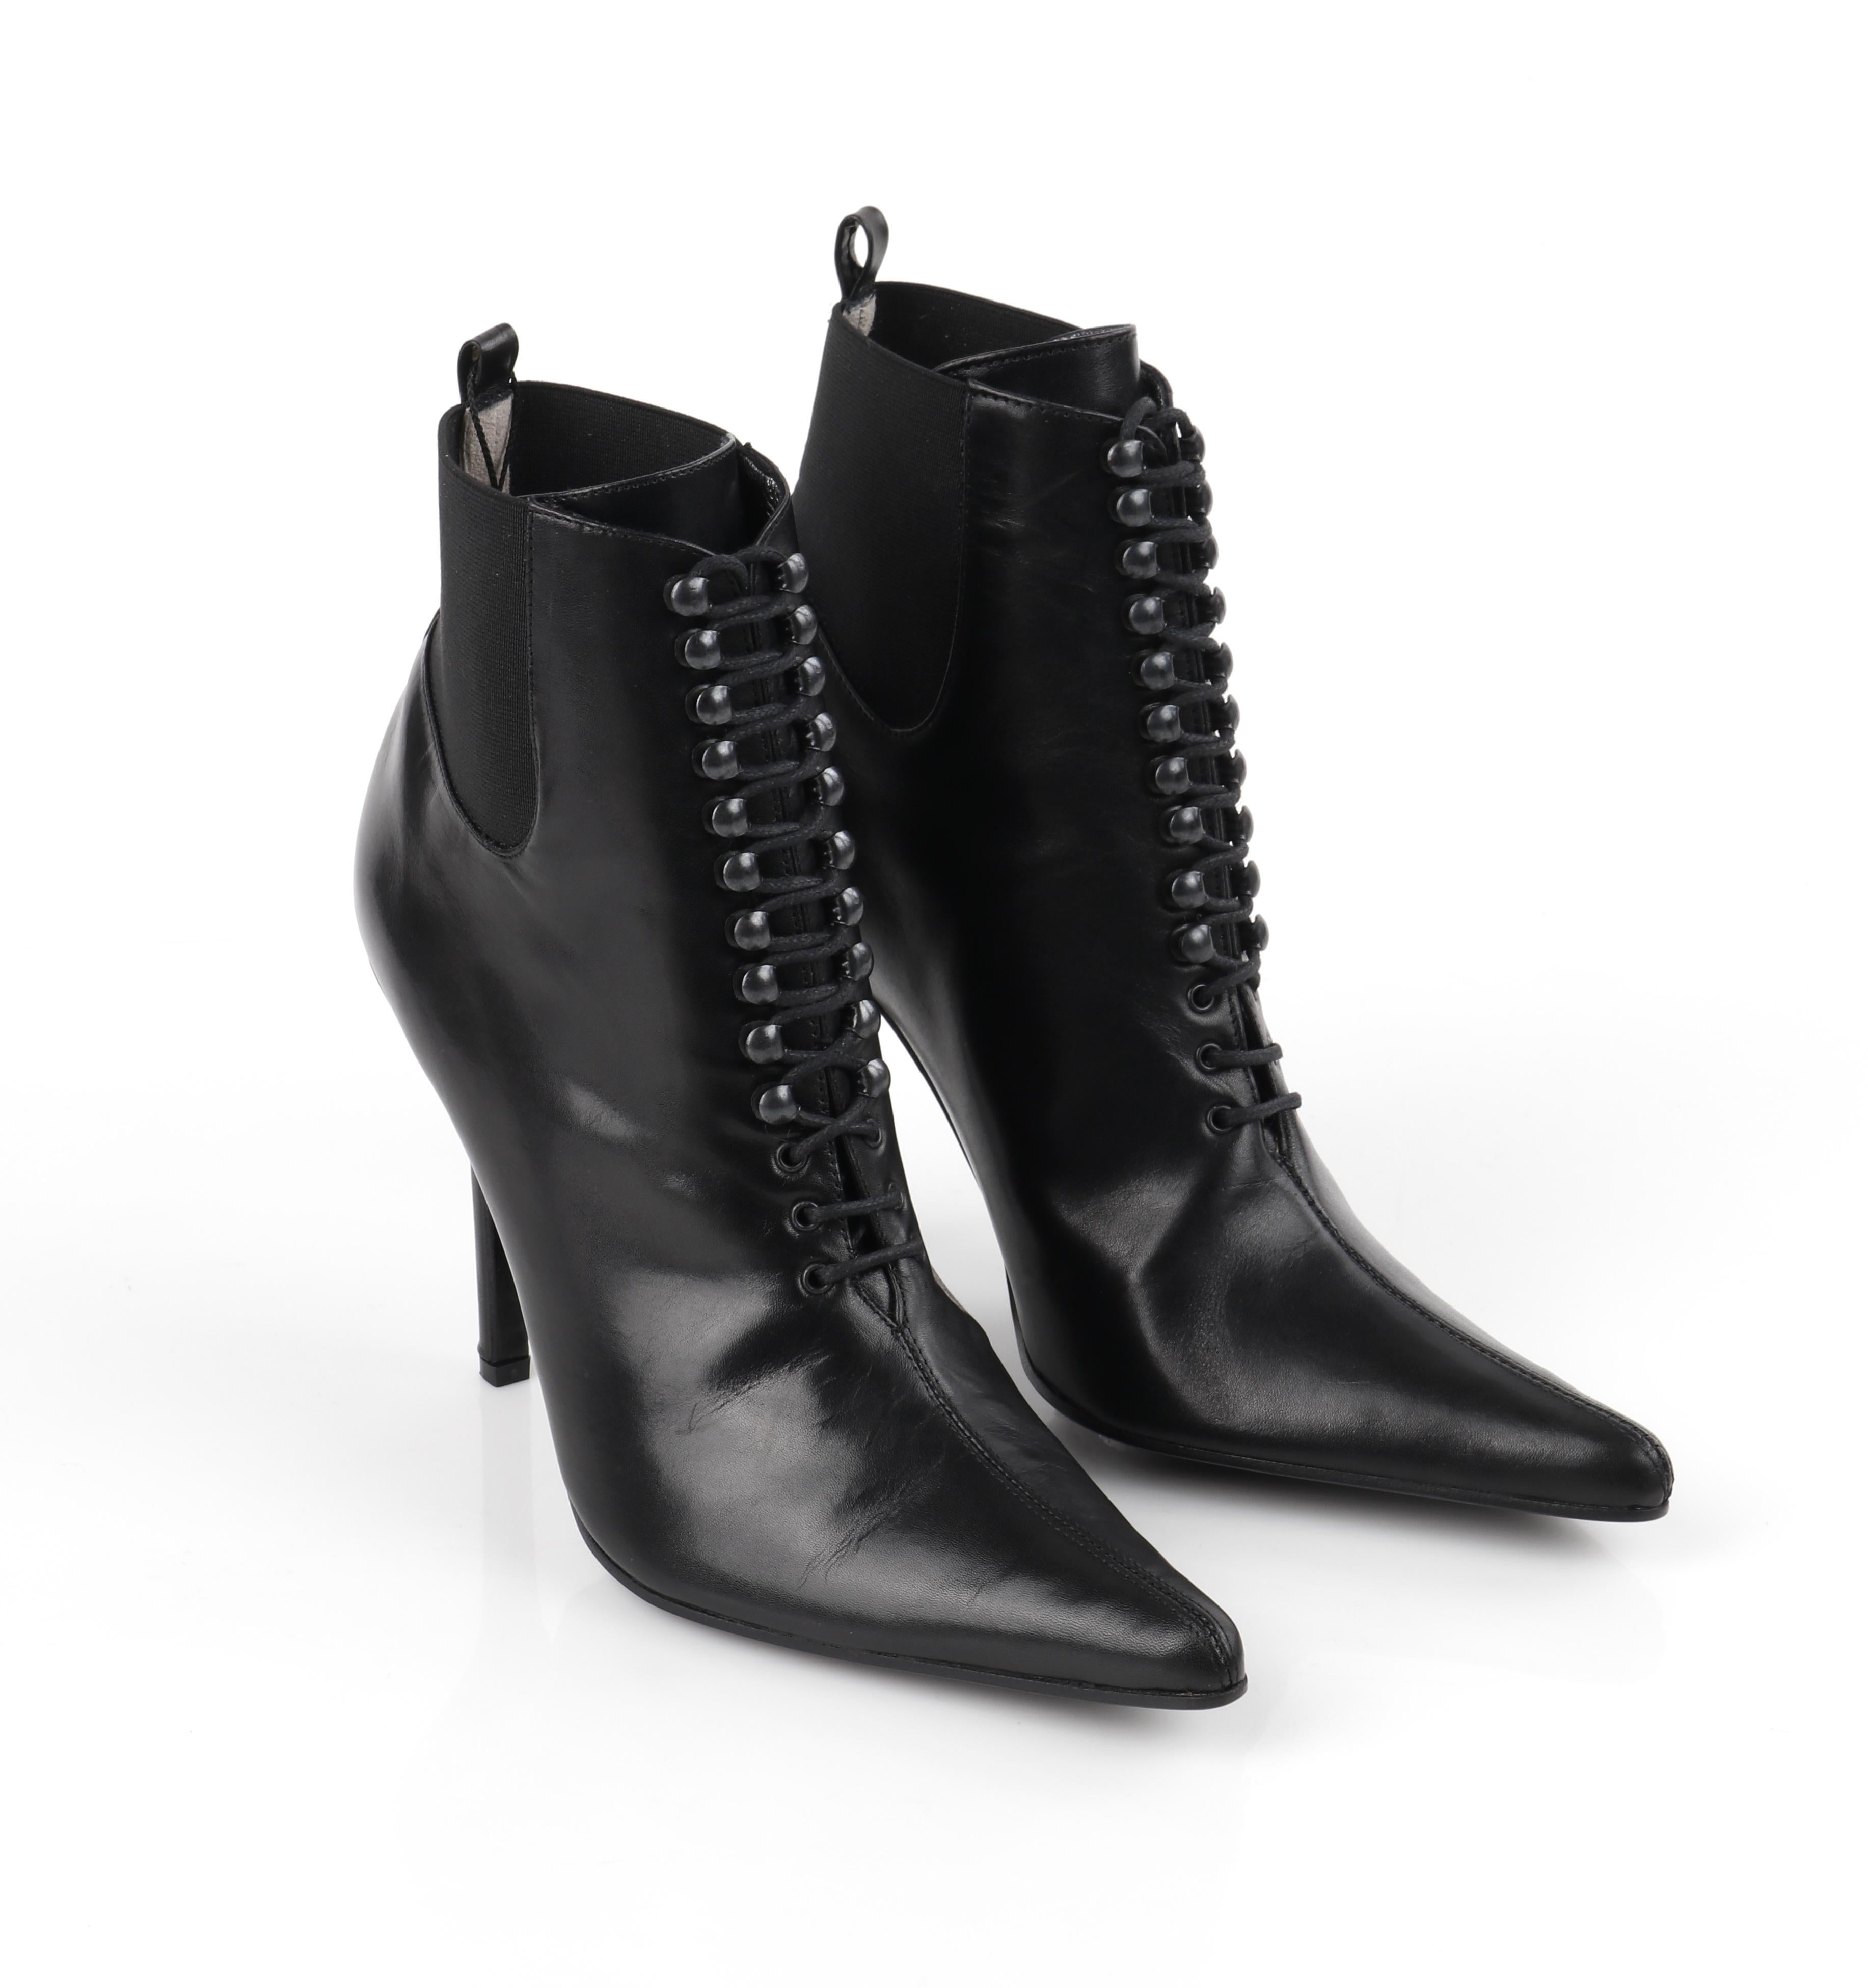 Women's DOLCE & GABBANA “Tronchetto” Black Leather Lace Up Pointed Toe Booties Heels 